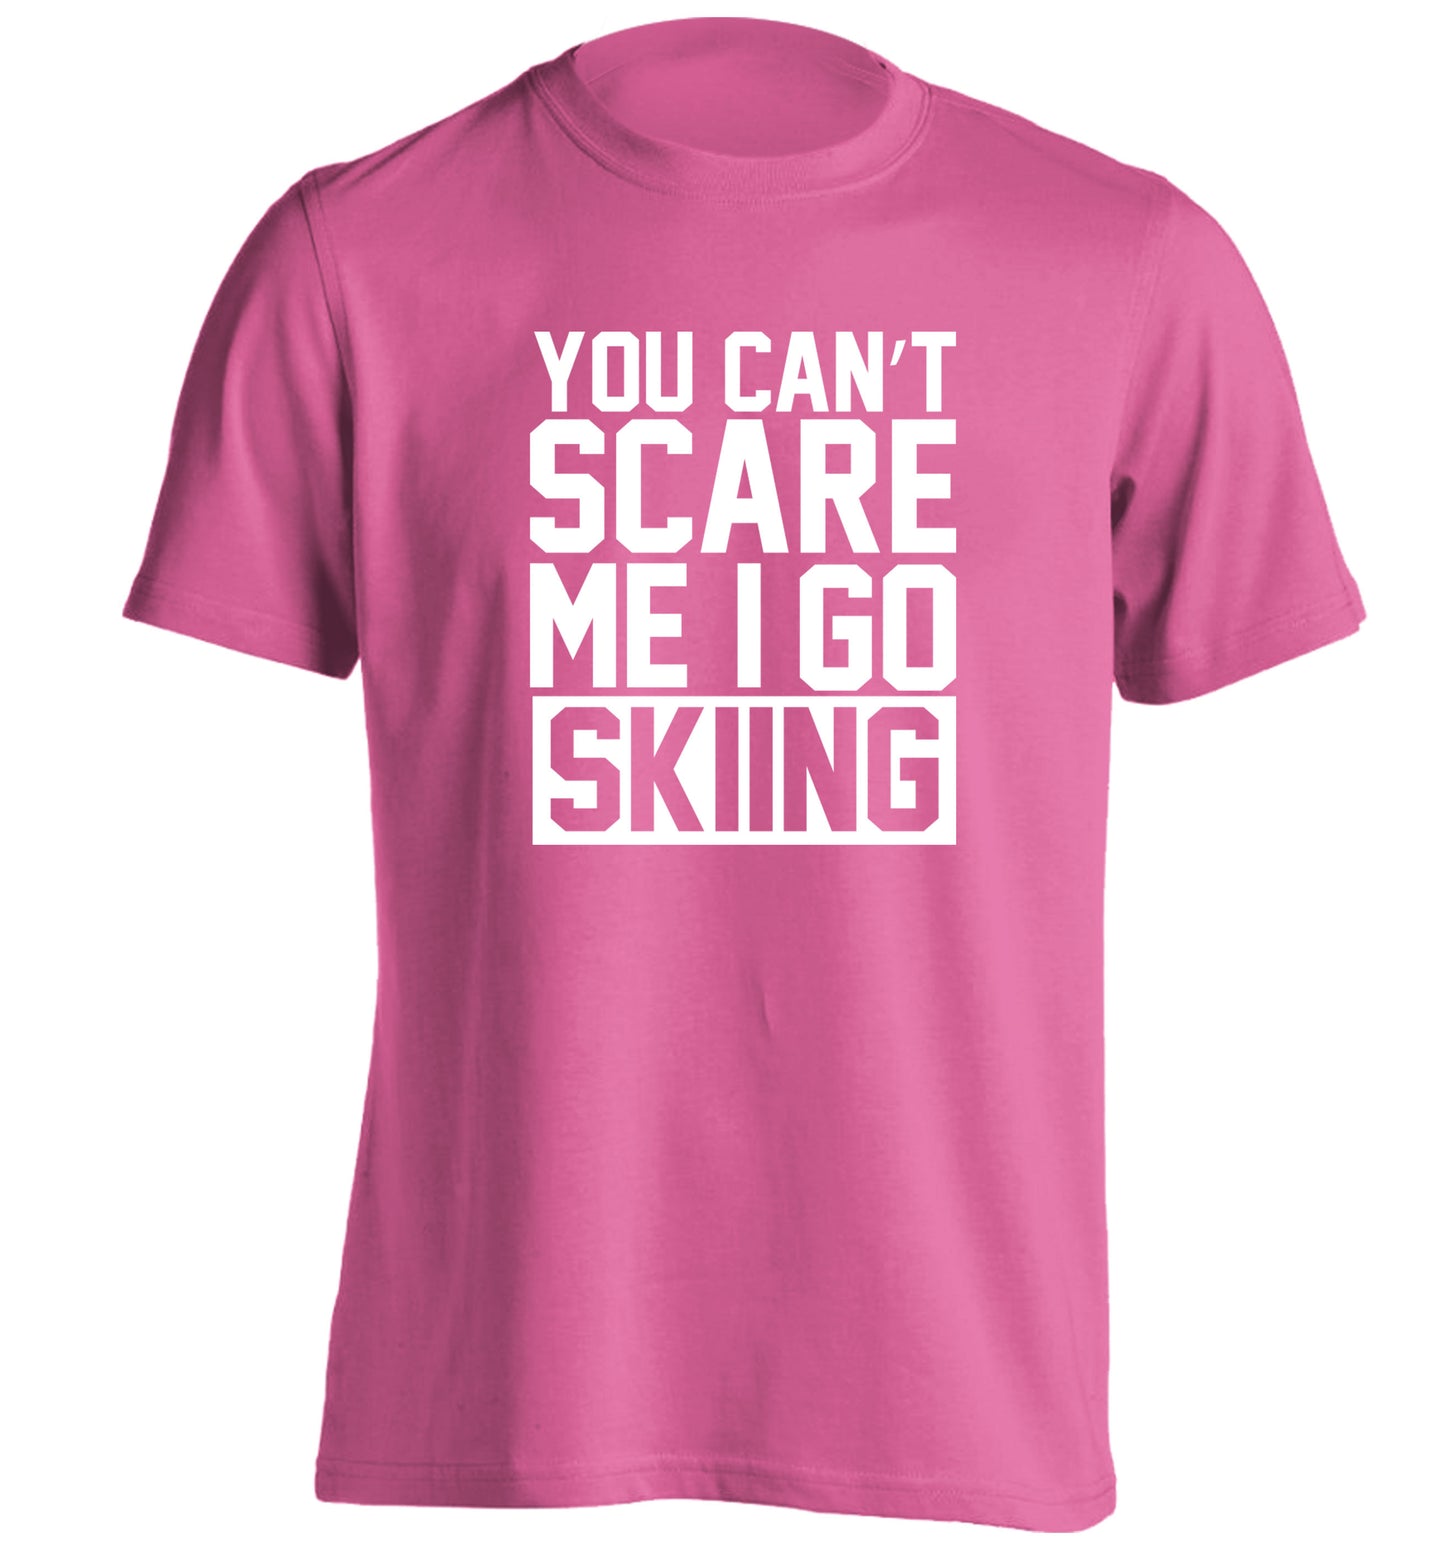 You can't scare me I go skiing adults unisex pink Tshirt 2XL